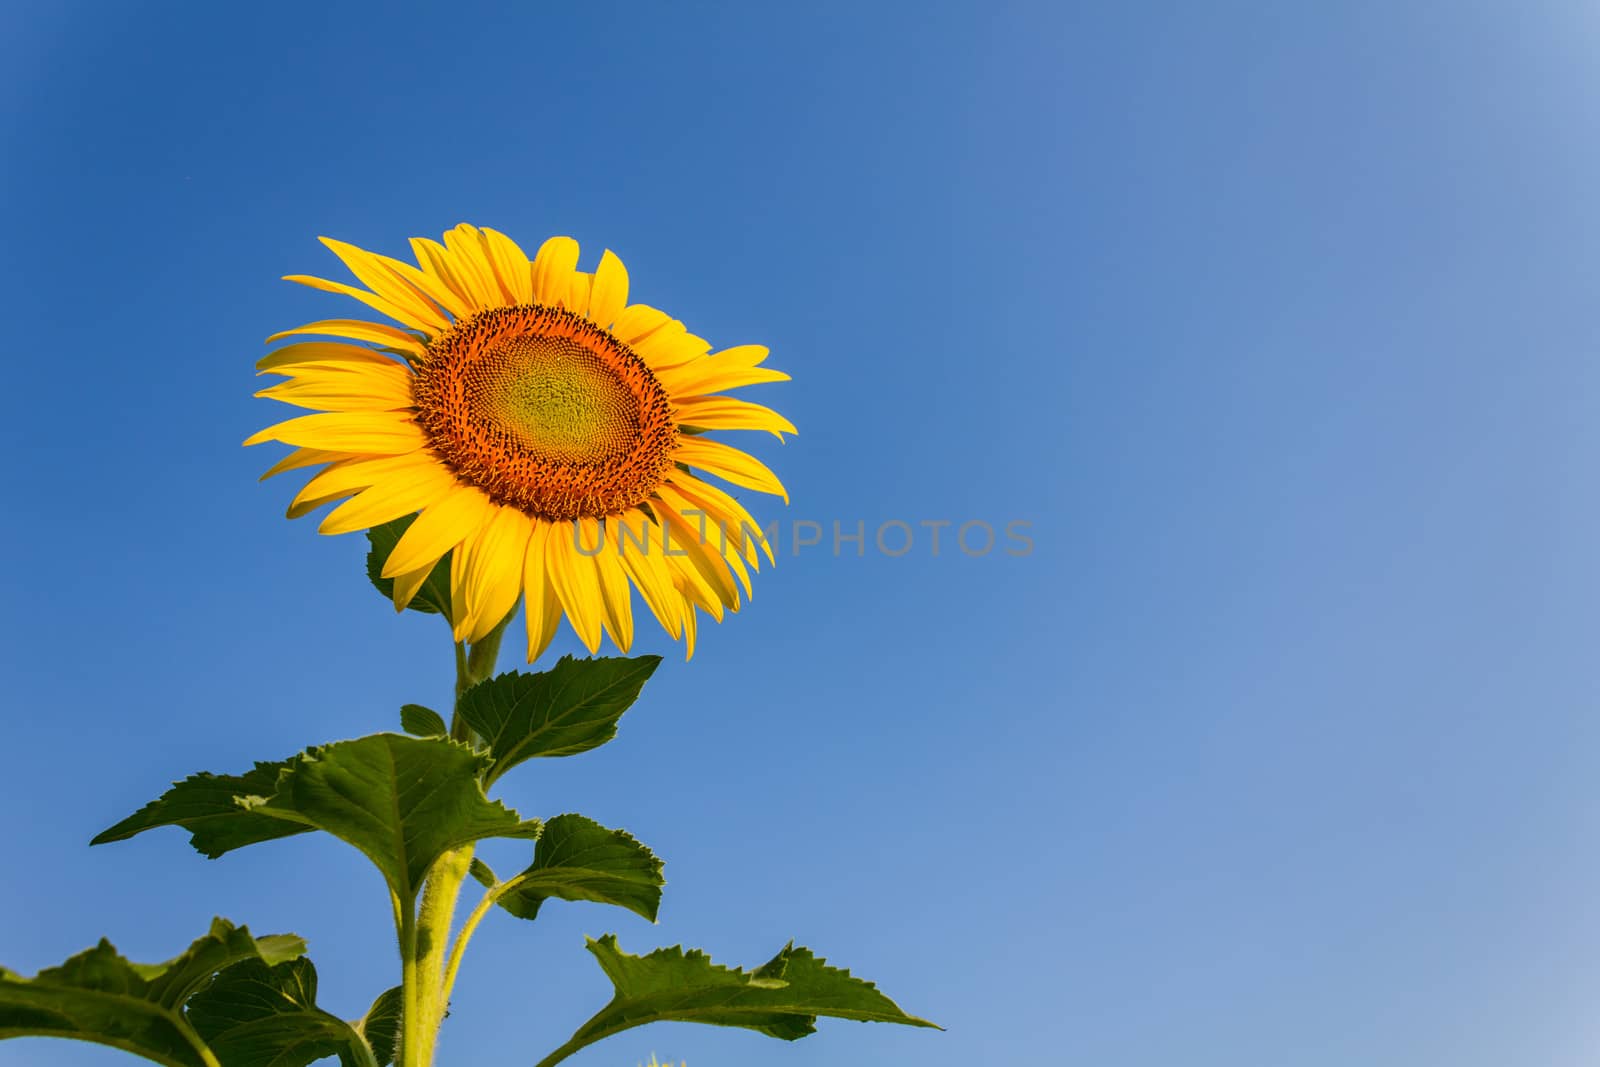 Sunflower by lavoview